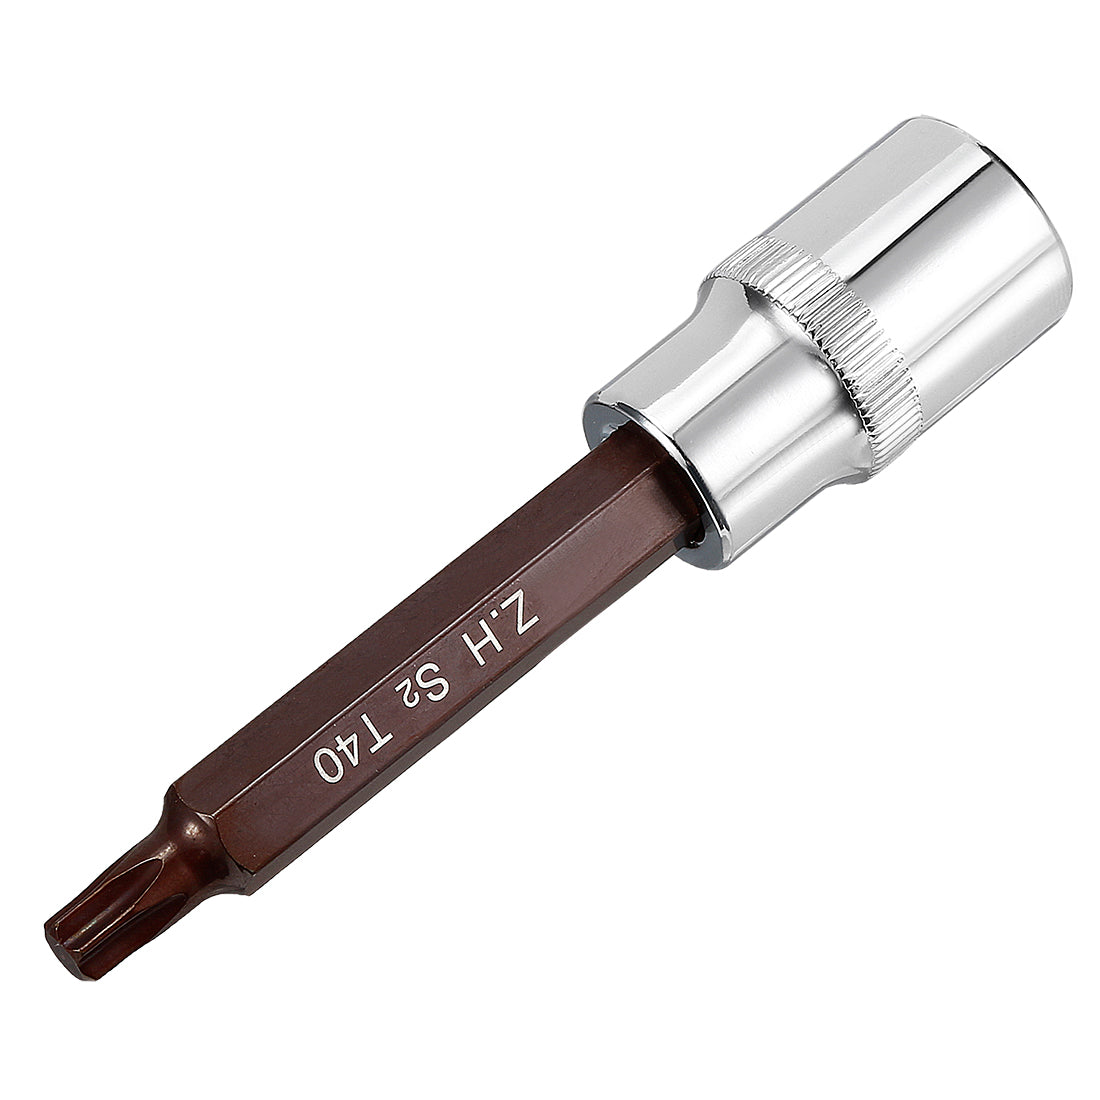 uxcell Uxcell Drive x Torx Bit Socket, S2 Steel Bits, CR-V Sockets (For Hand Use Only)